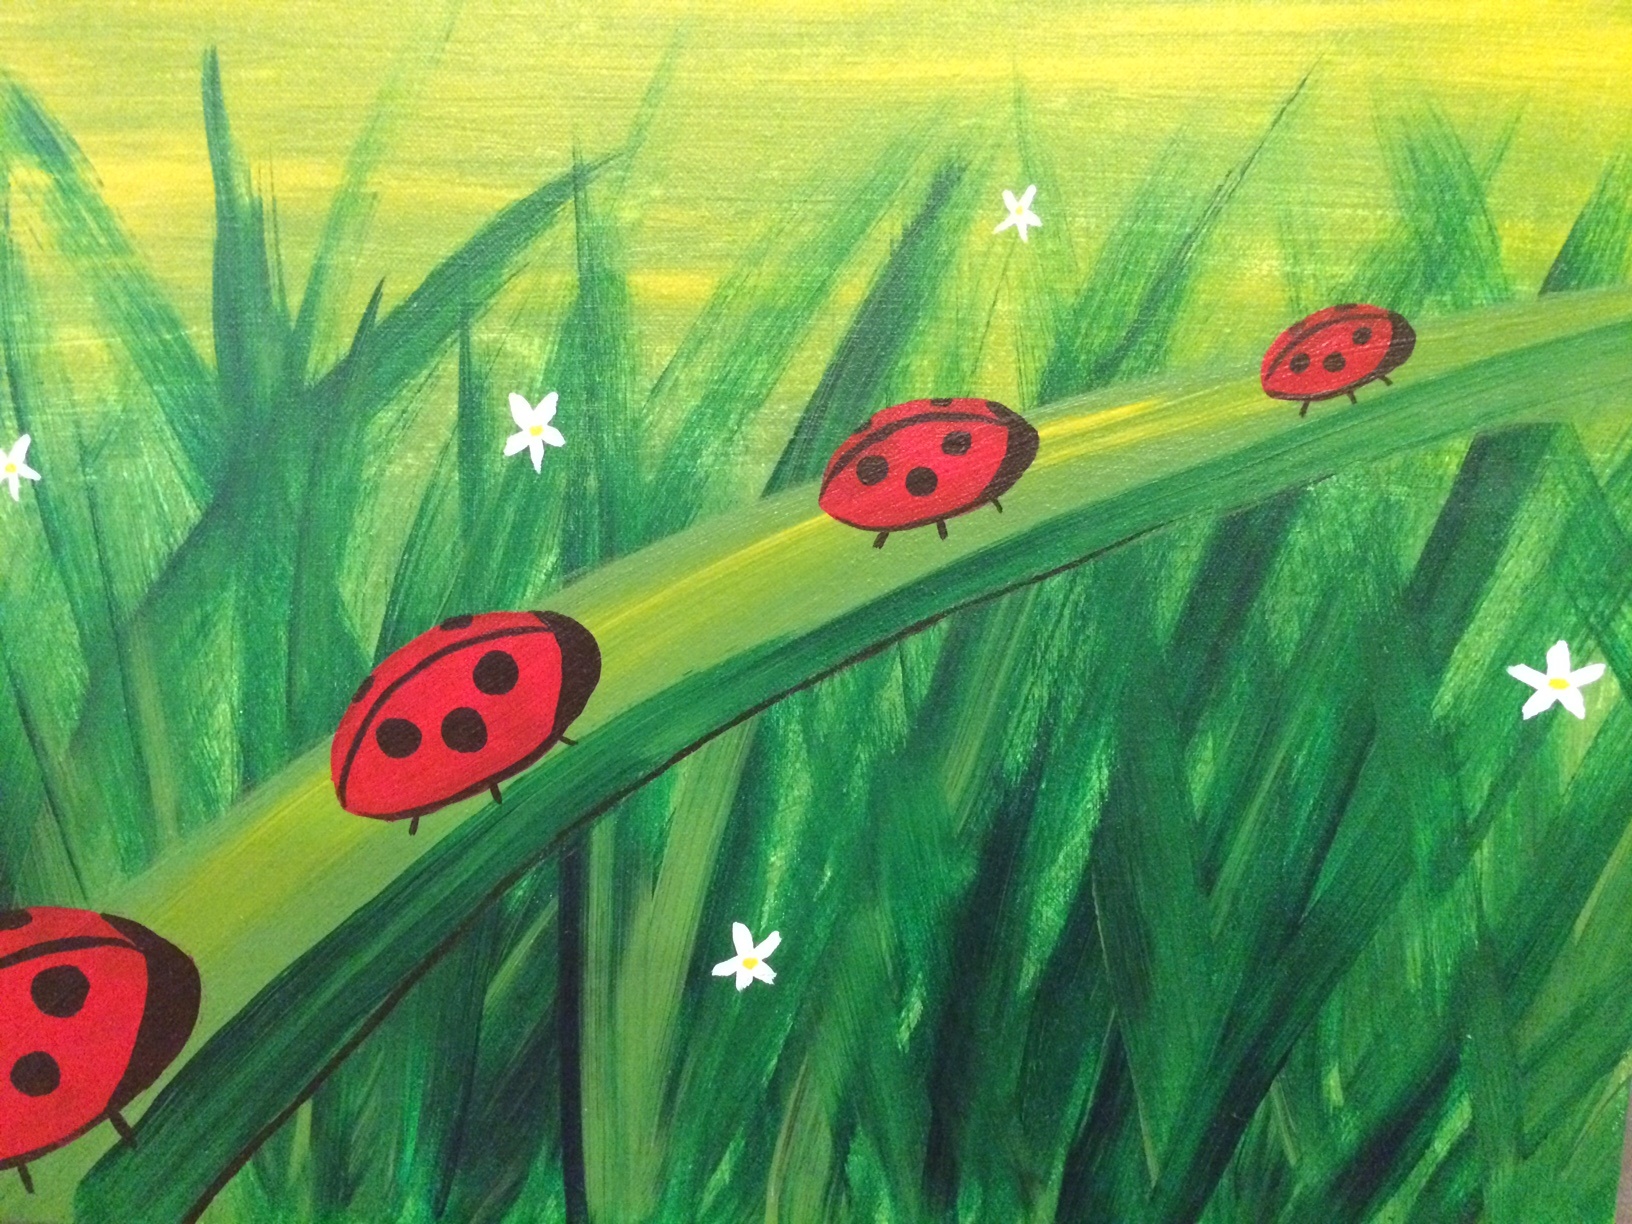 Lady Bugs in a Row